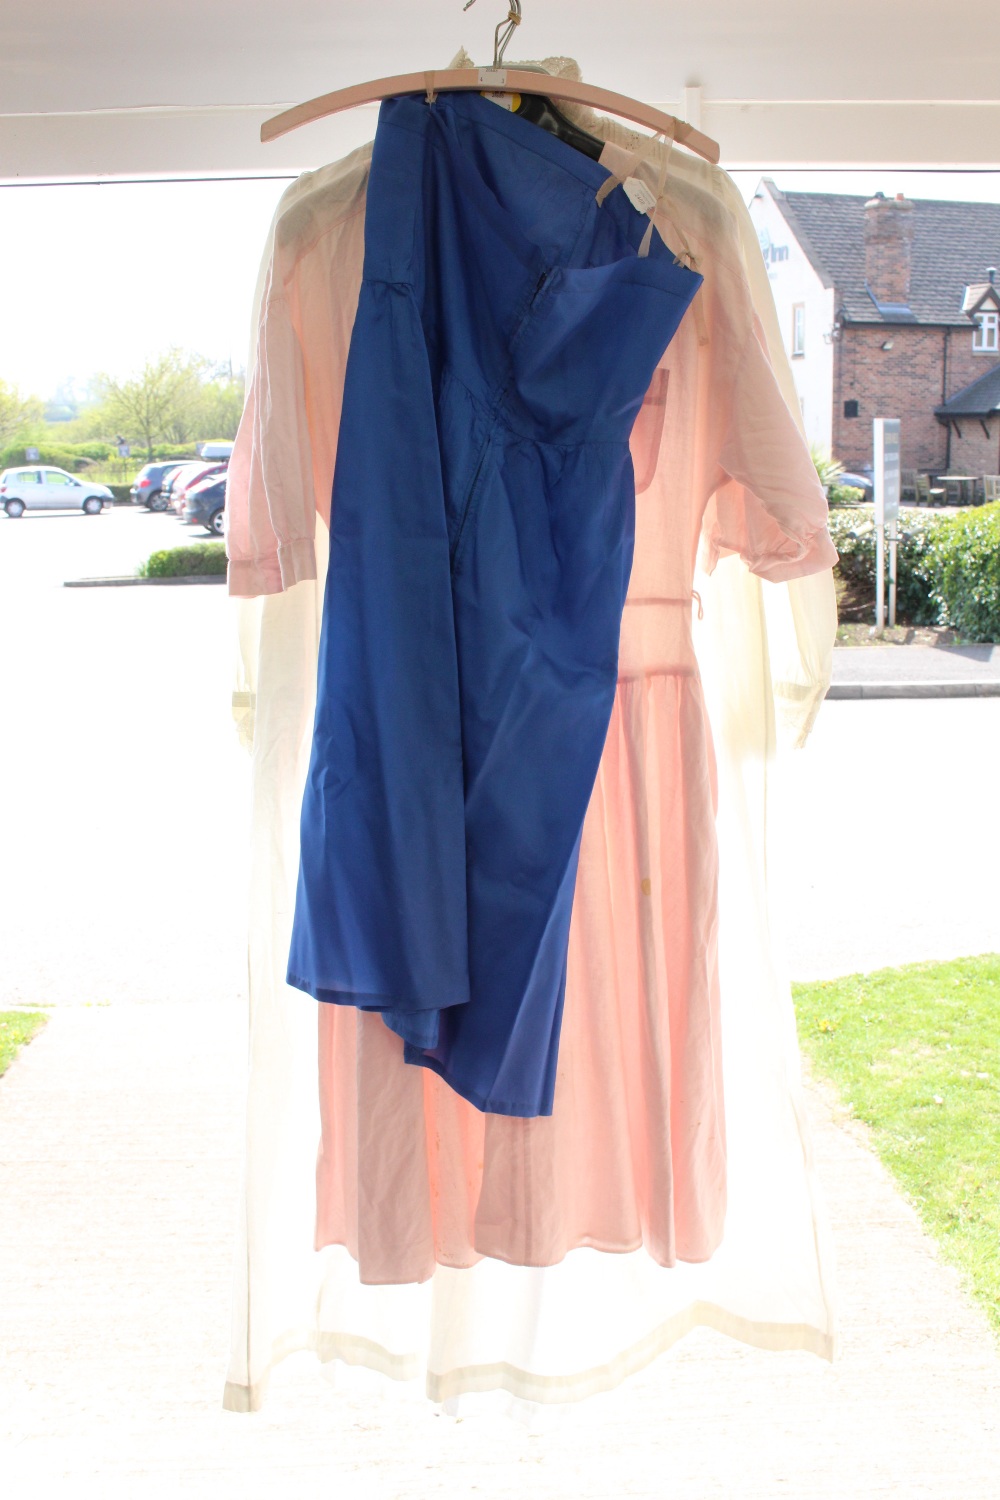 Cobolt blue silk underskirt (zip replacement)  (only one strap) M.S pink 1980s pale pink dress,